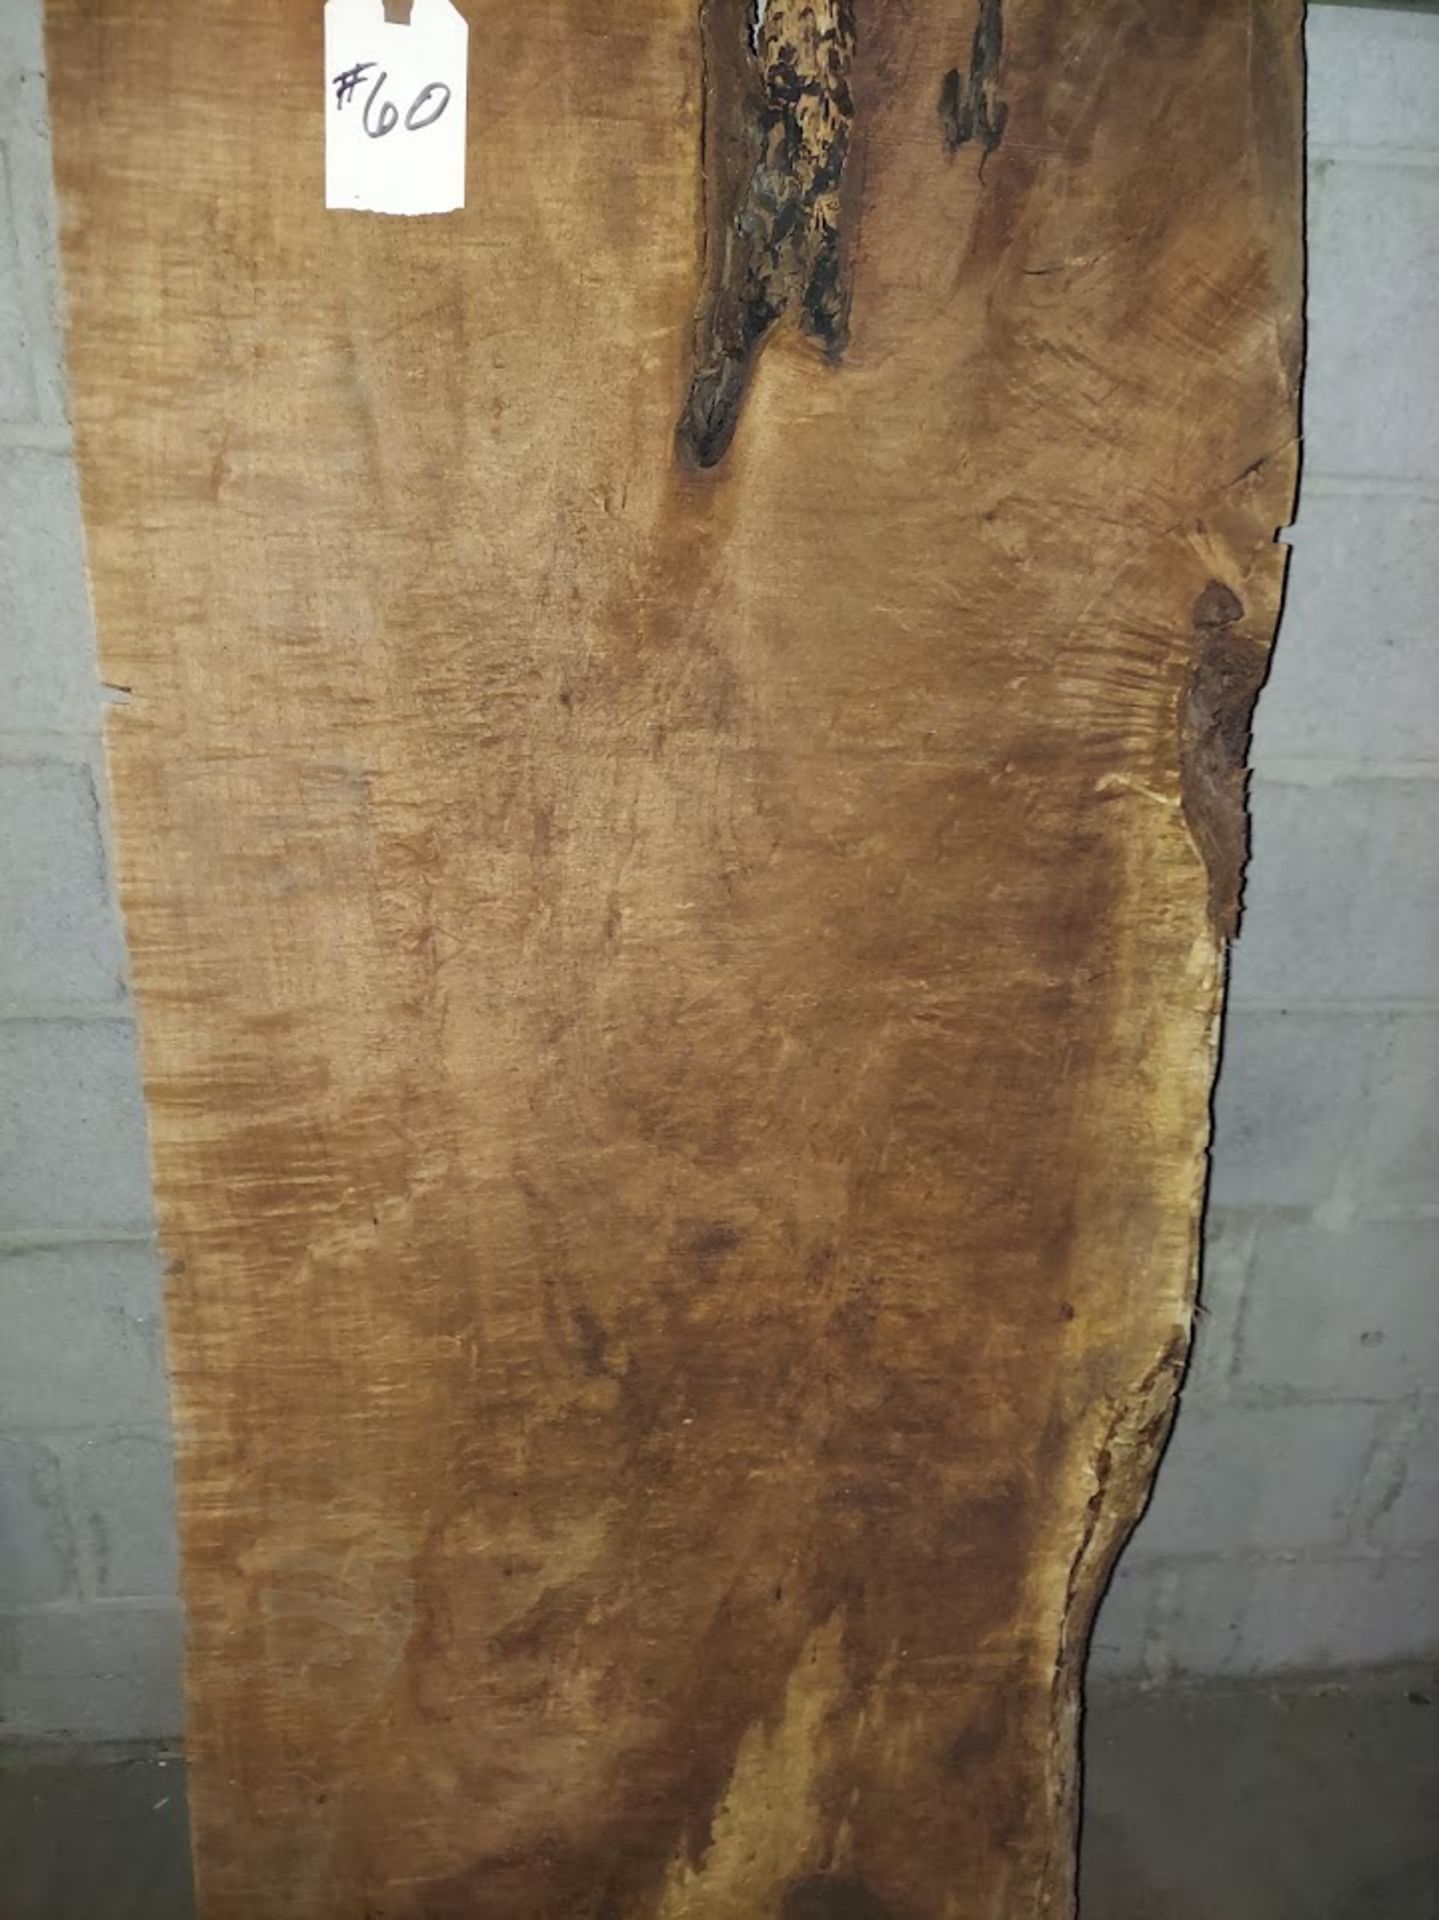 Mesquite Hardwood Lumber Slab, Size is approx. 96" x 15"-23" x 2" - Image 2 of 2